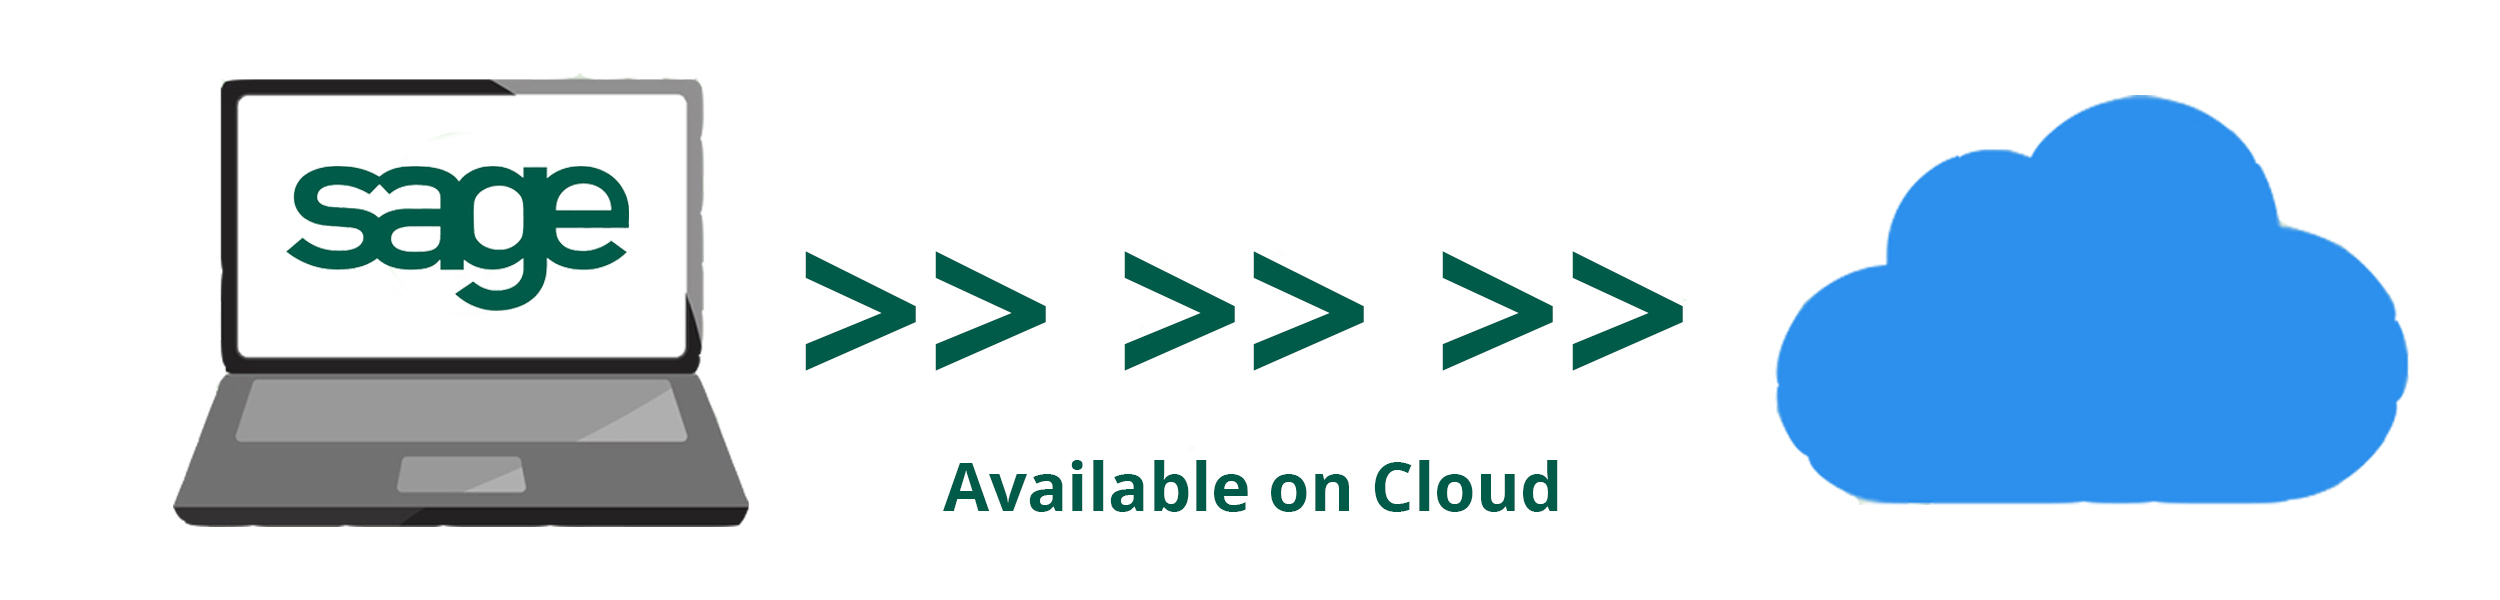 Sage-available-on-cloud